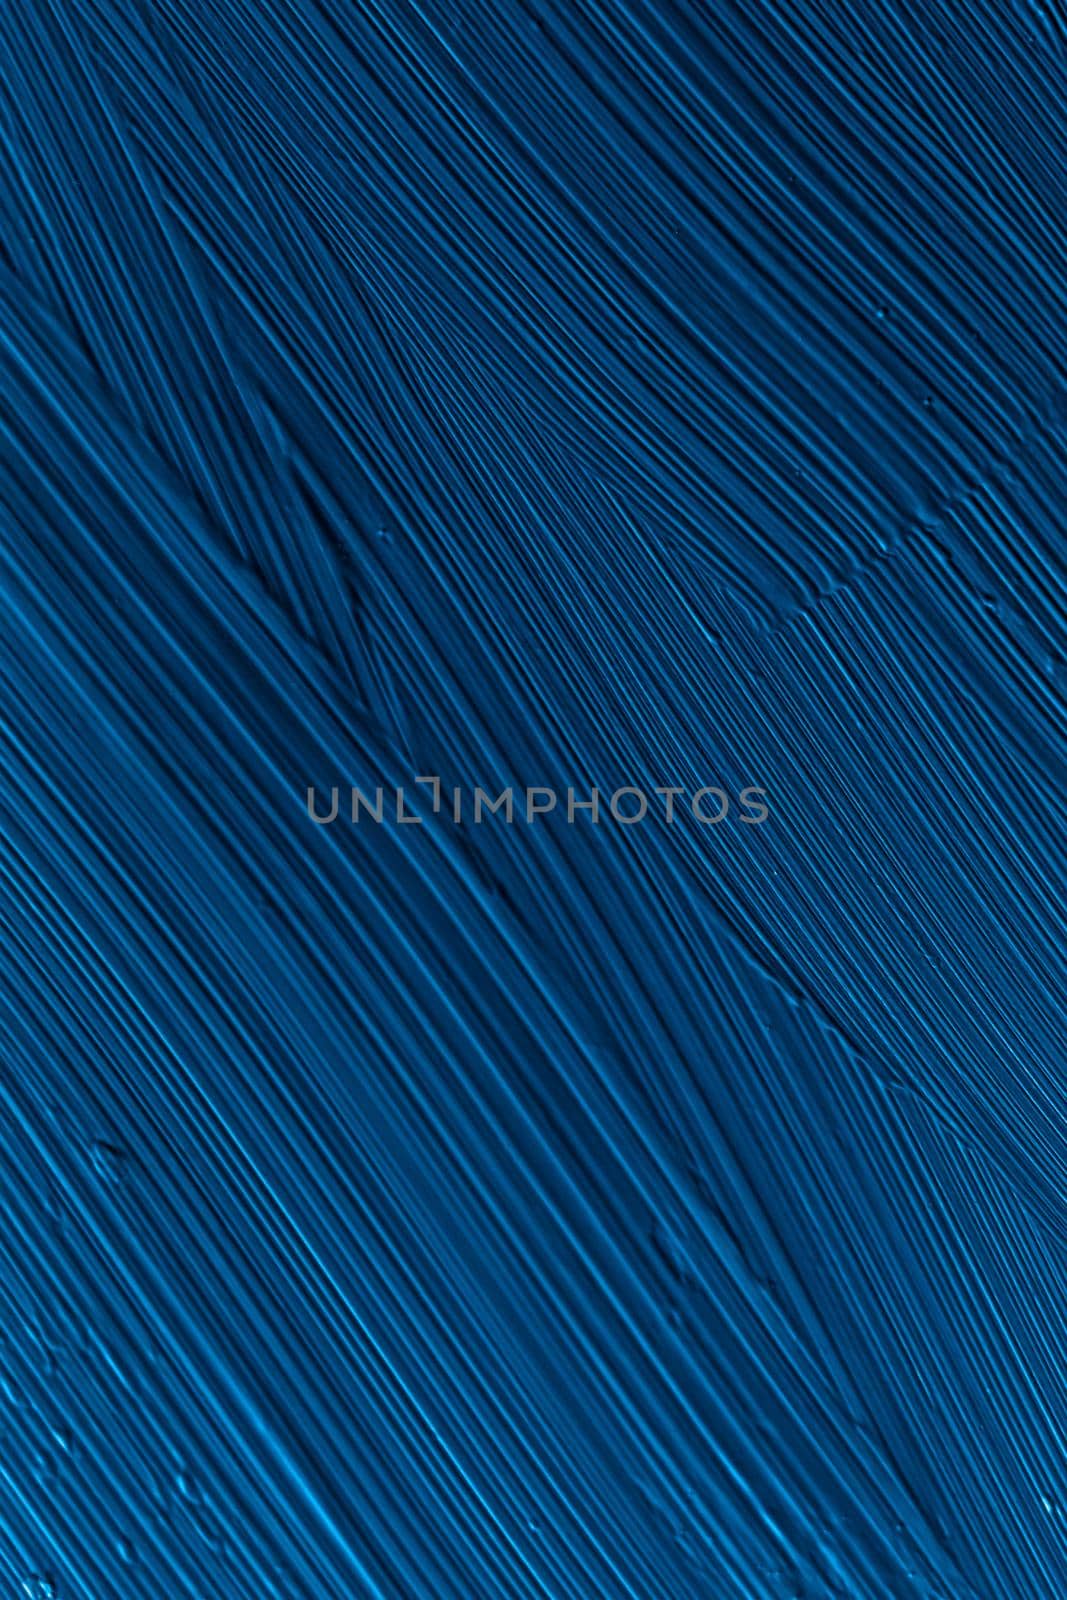 Art, branding and makeup concept - Cosmetics abstract texture background, blue acrylic paint brush stroke, textured cream product as make-up backdrop for luxury beauty brand, holiday banner design